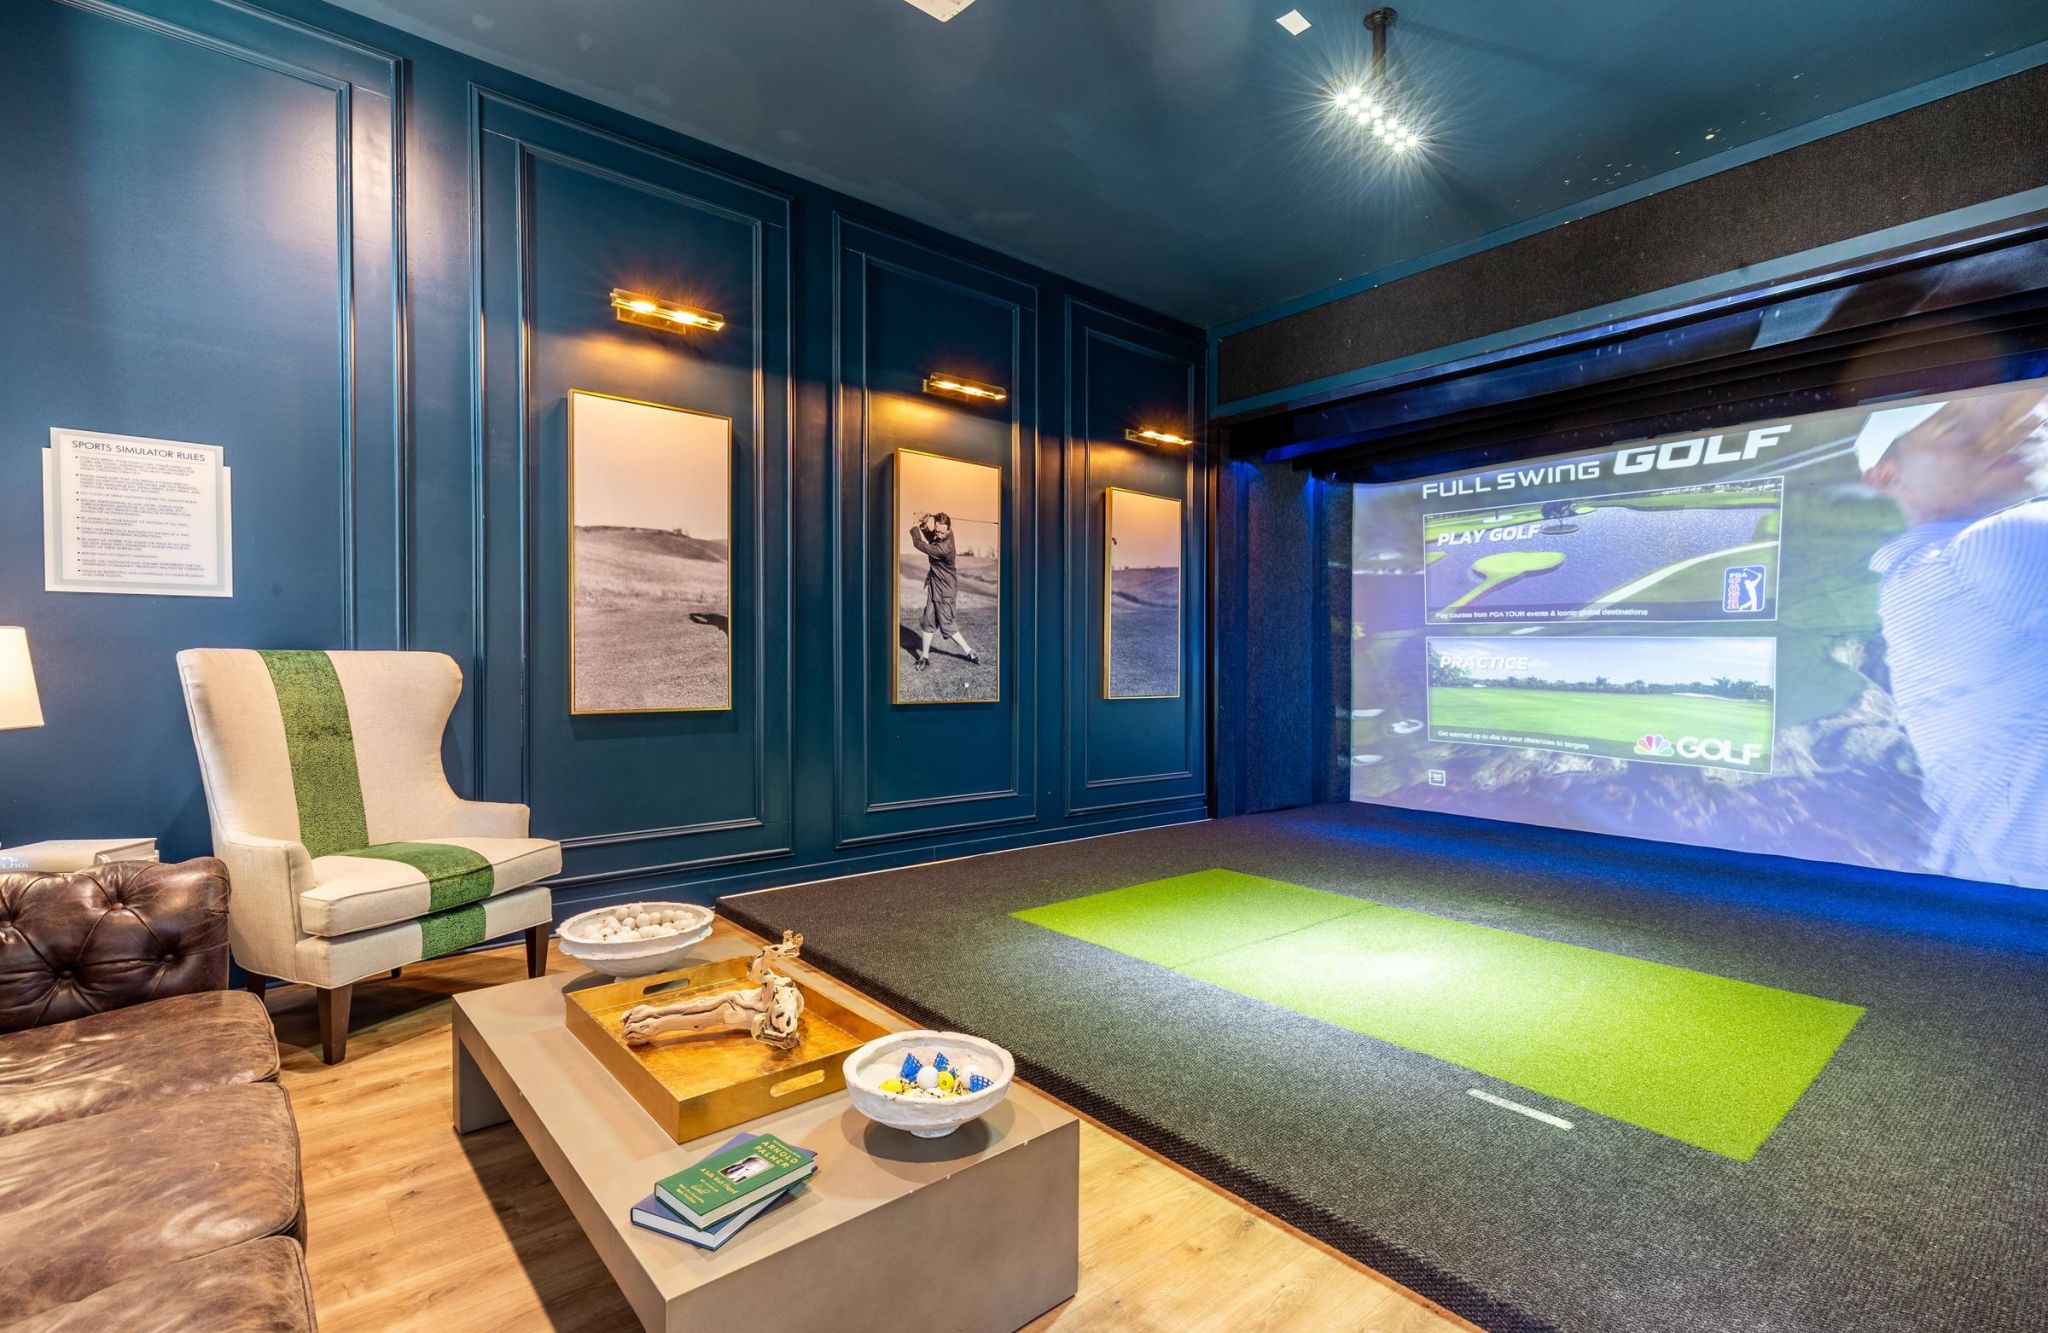 Hawthorne Waterside luxurious indoor golf simulator room with a leather sofa, accent chair, and framed vintage golf photos.